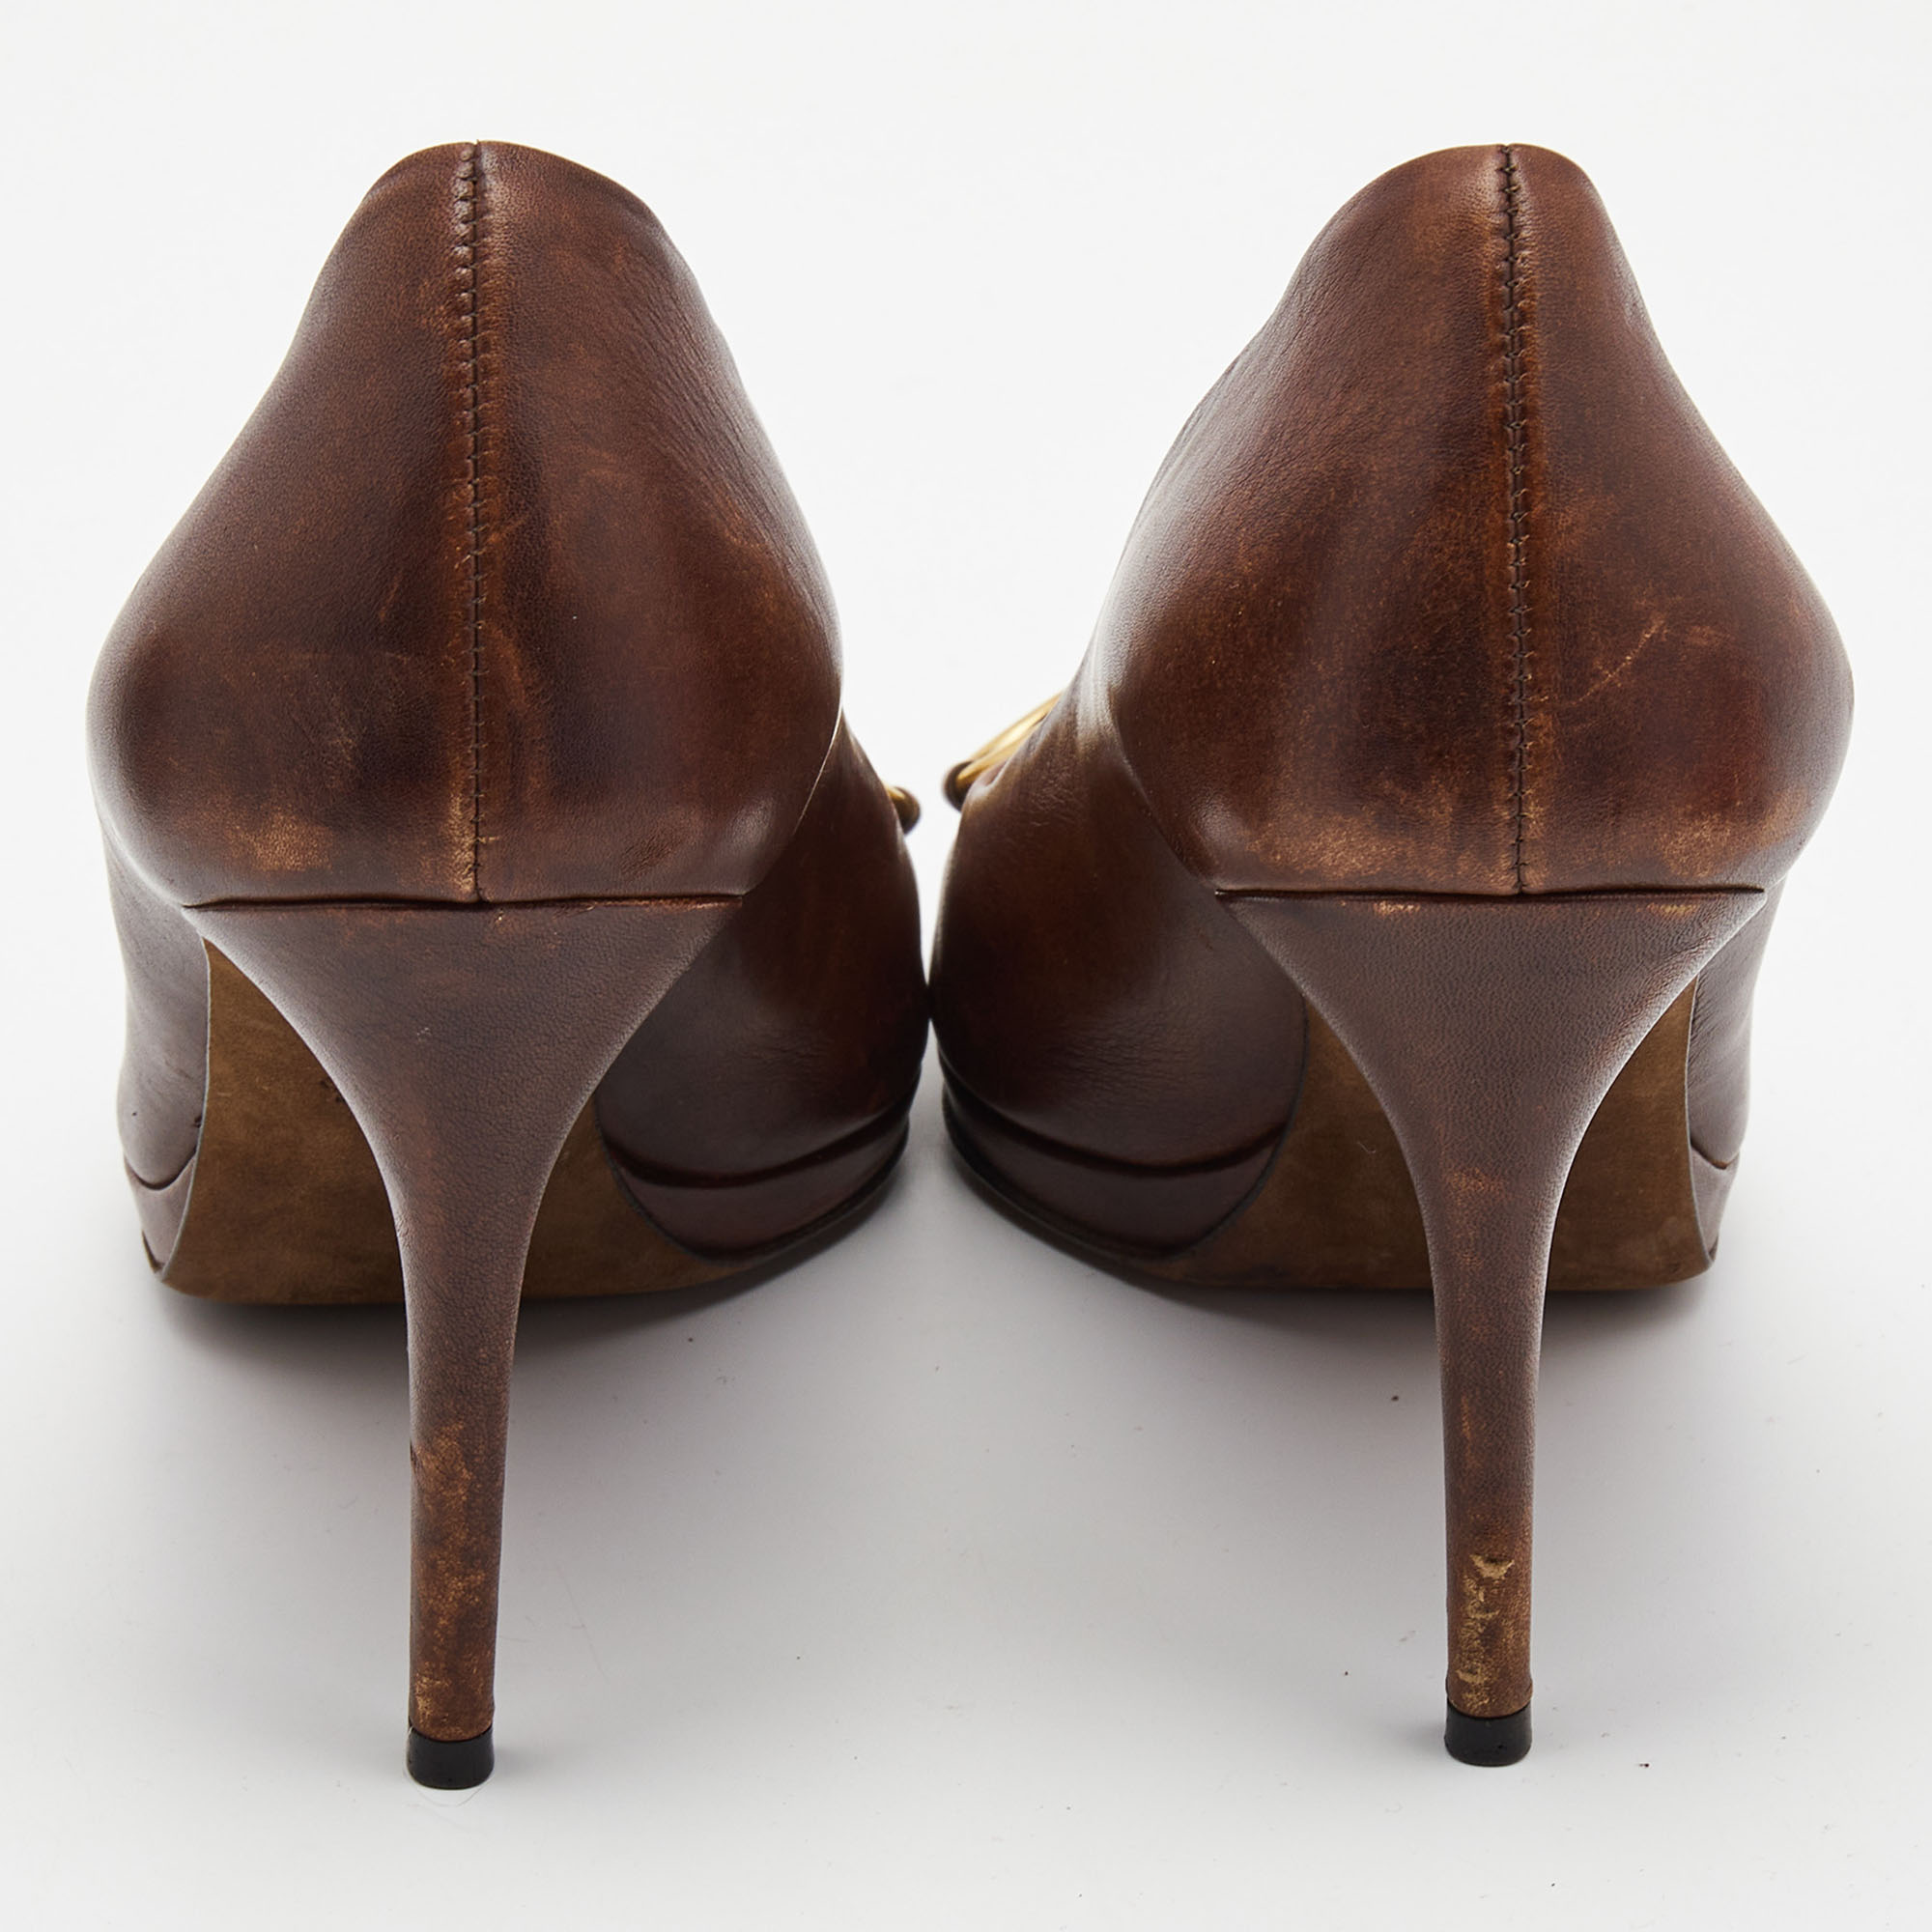 Gucci Brown Leather Hollywood Peep Toe Pumps Size 39